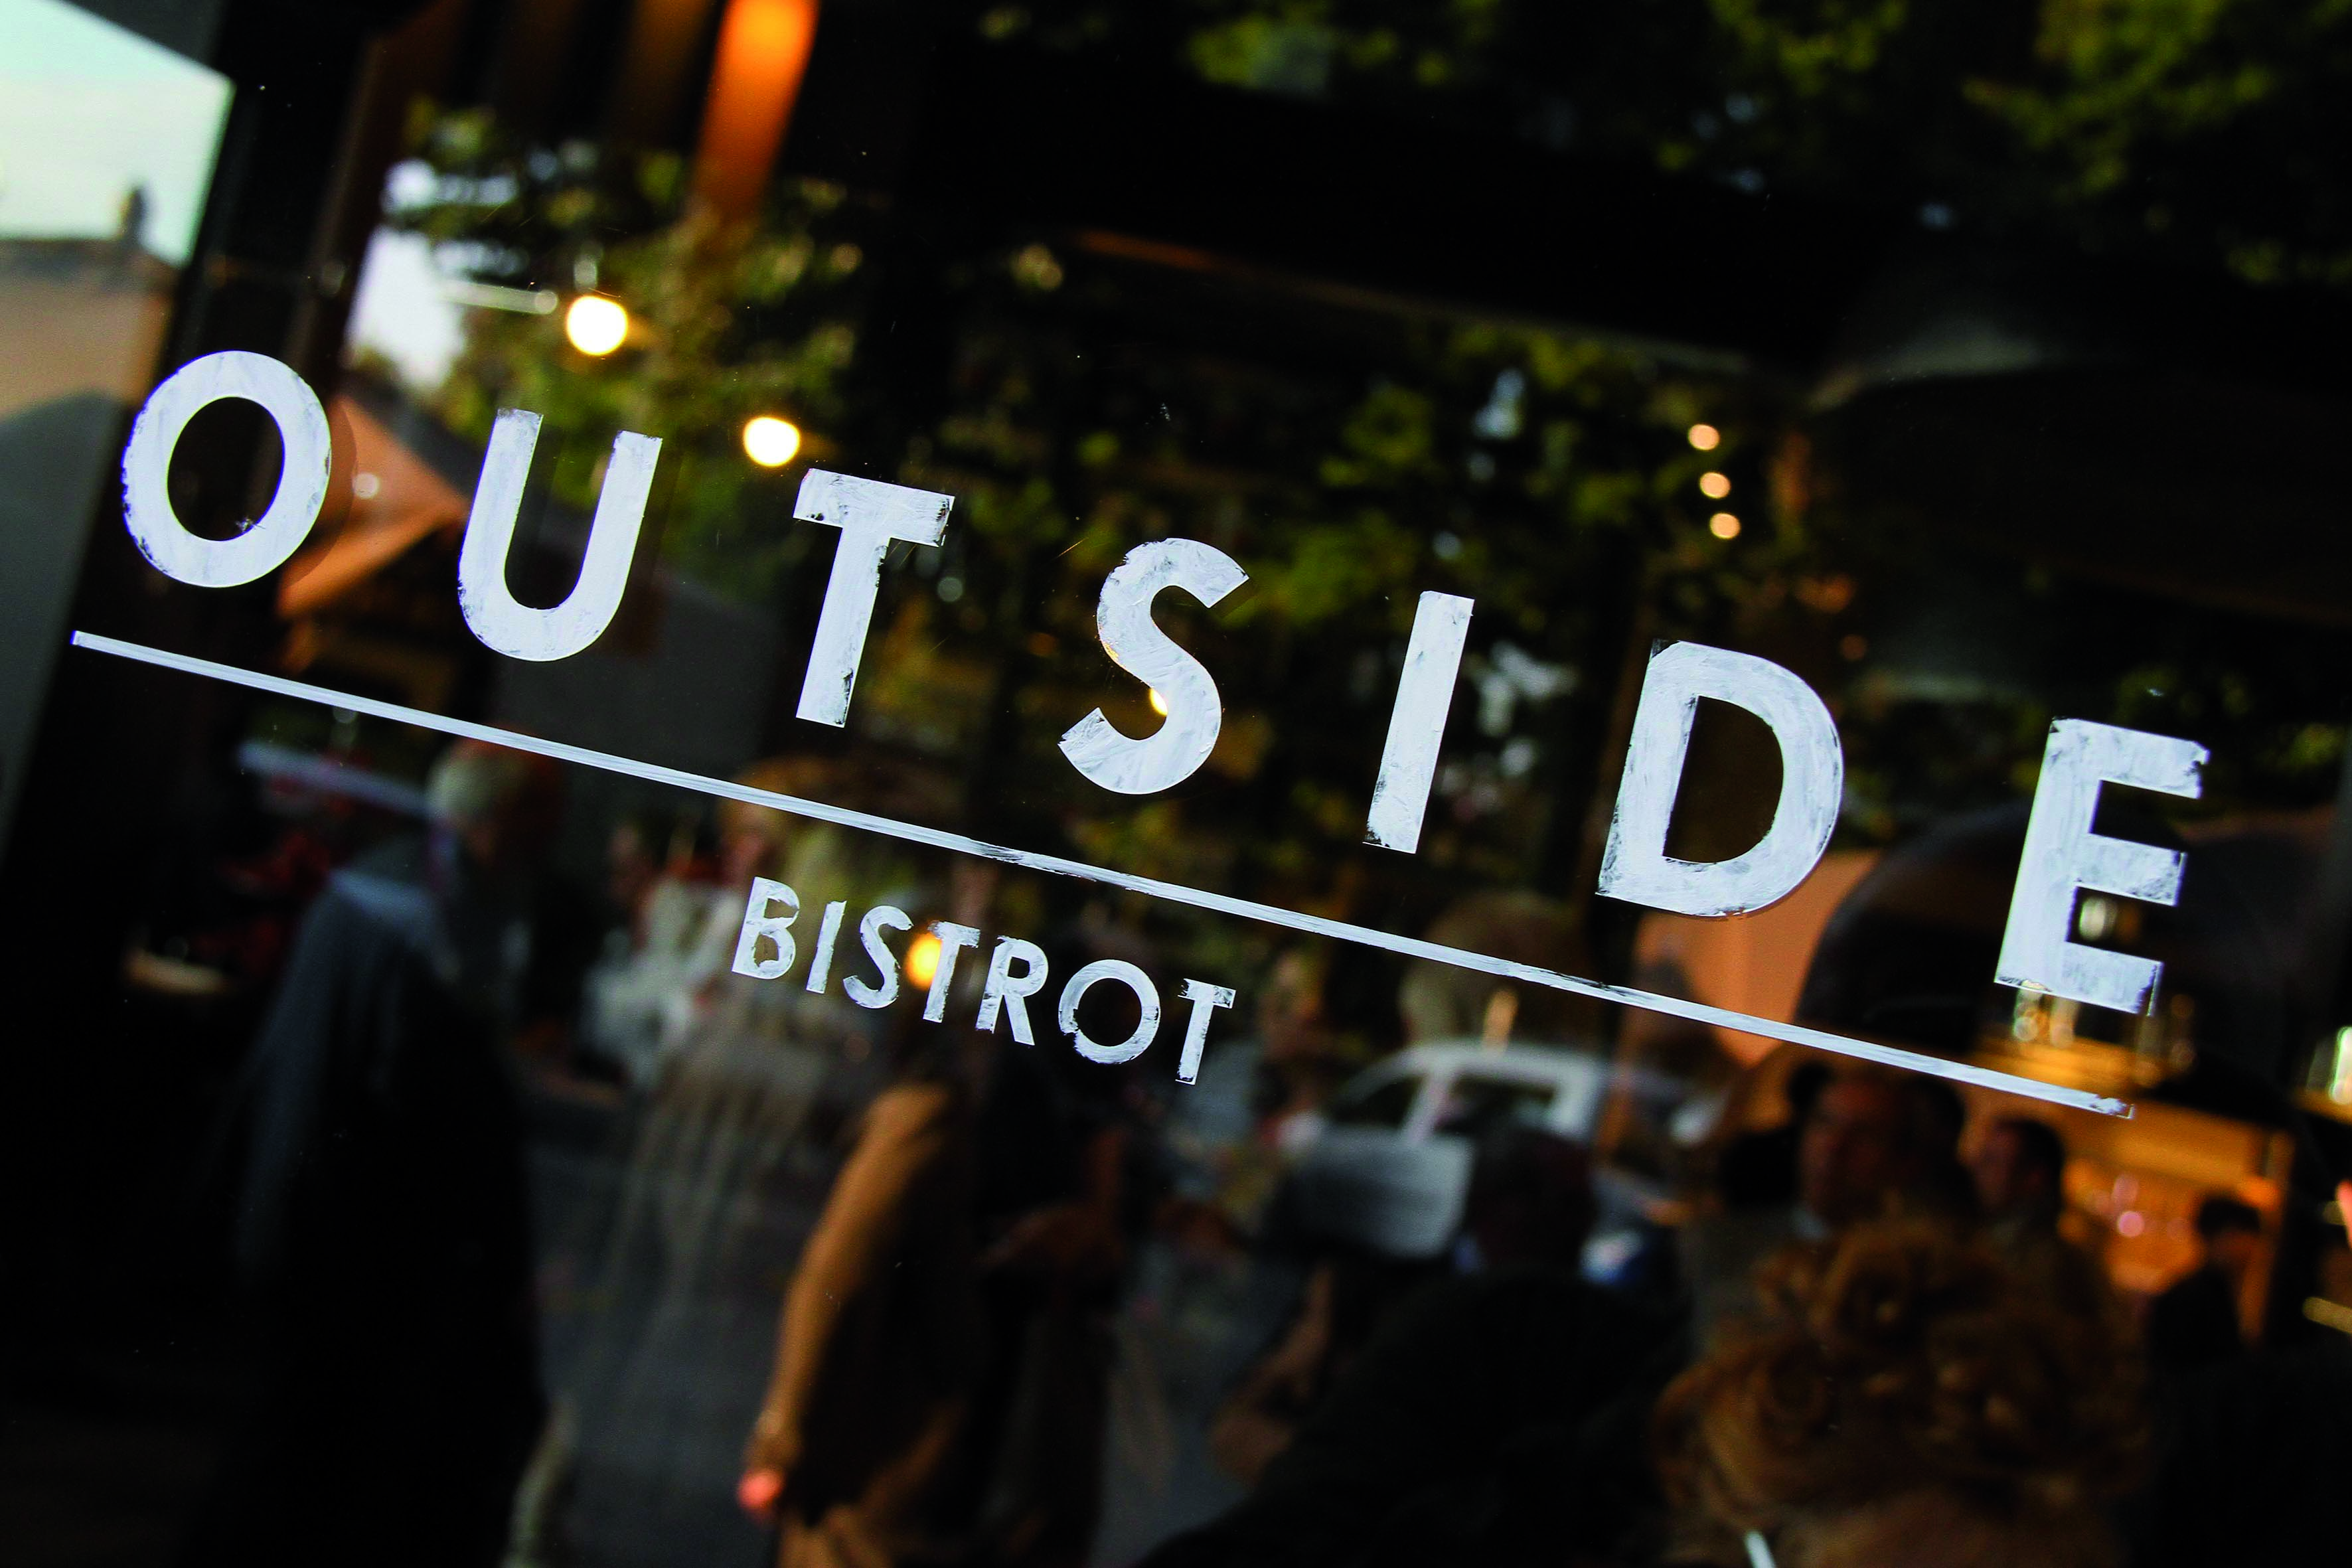 Outside Bistrot 